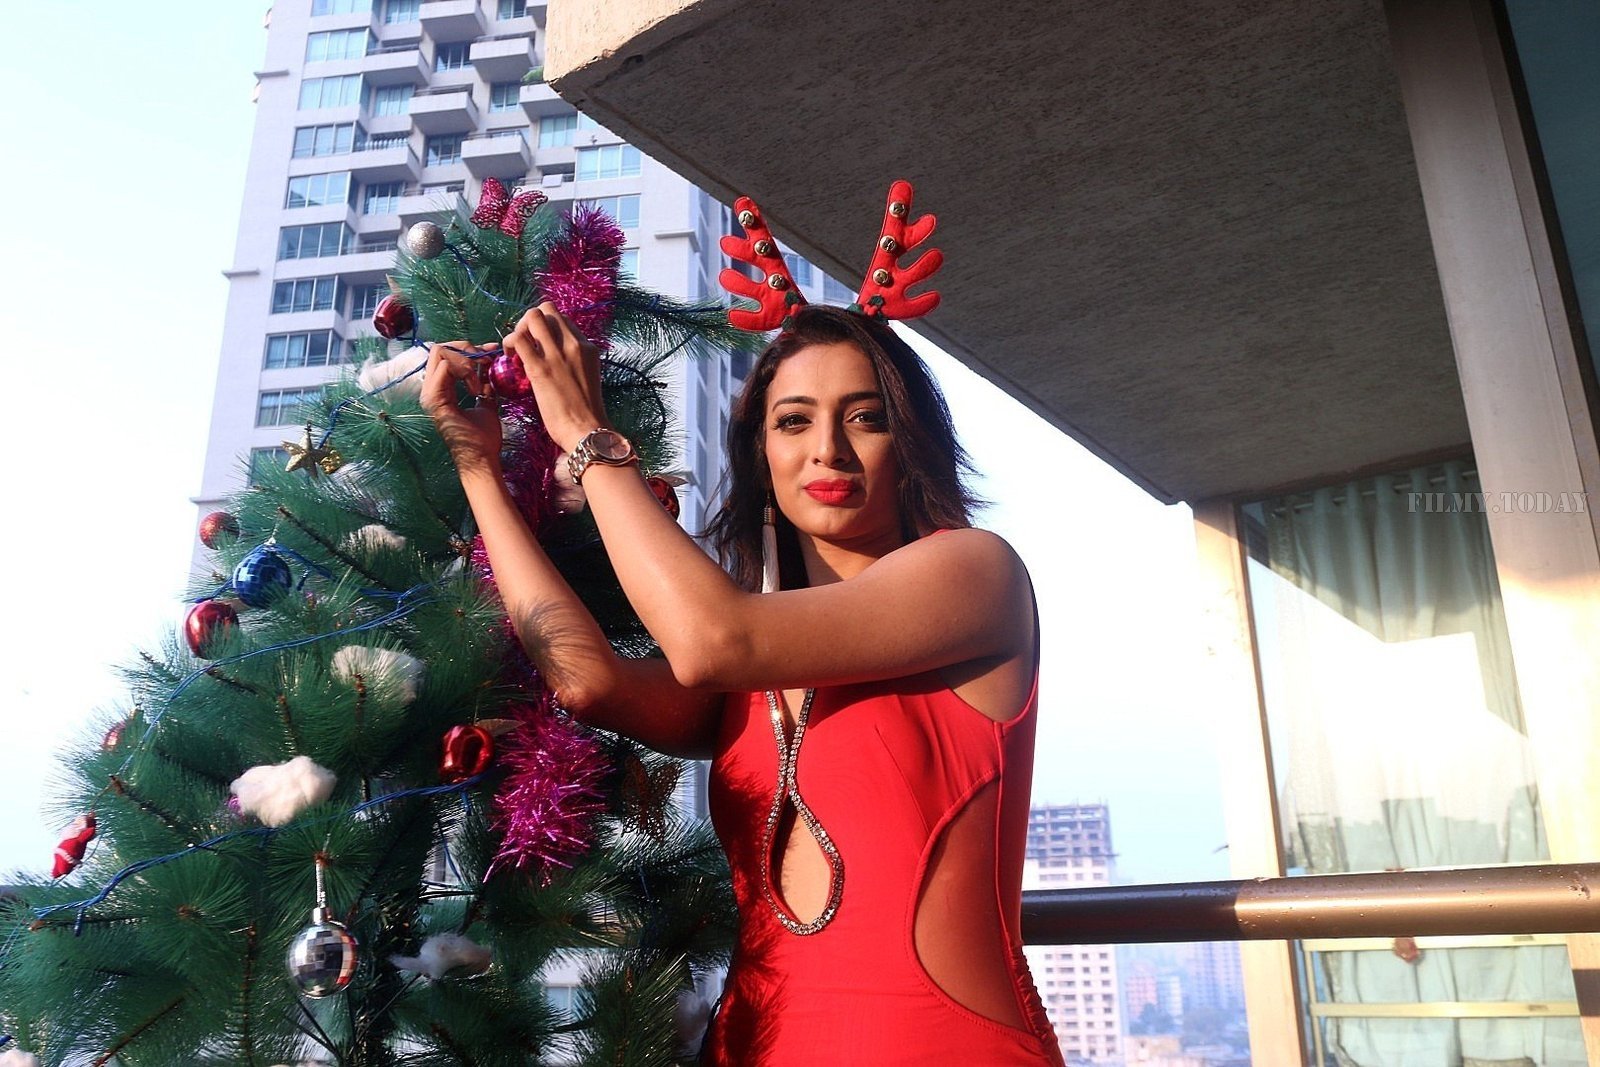 Actress Heena Panchal As Sexy Santa in Christmas Photoshoot | Picture 1553959